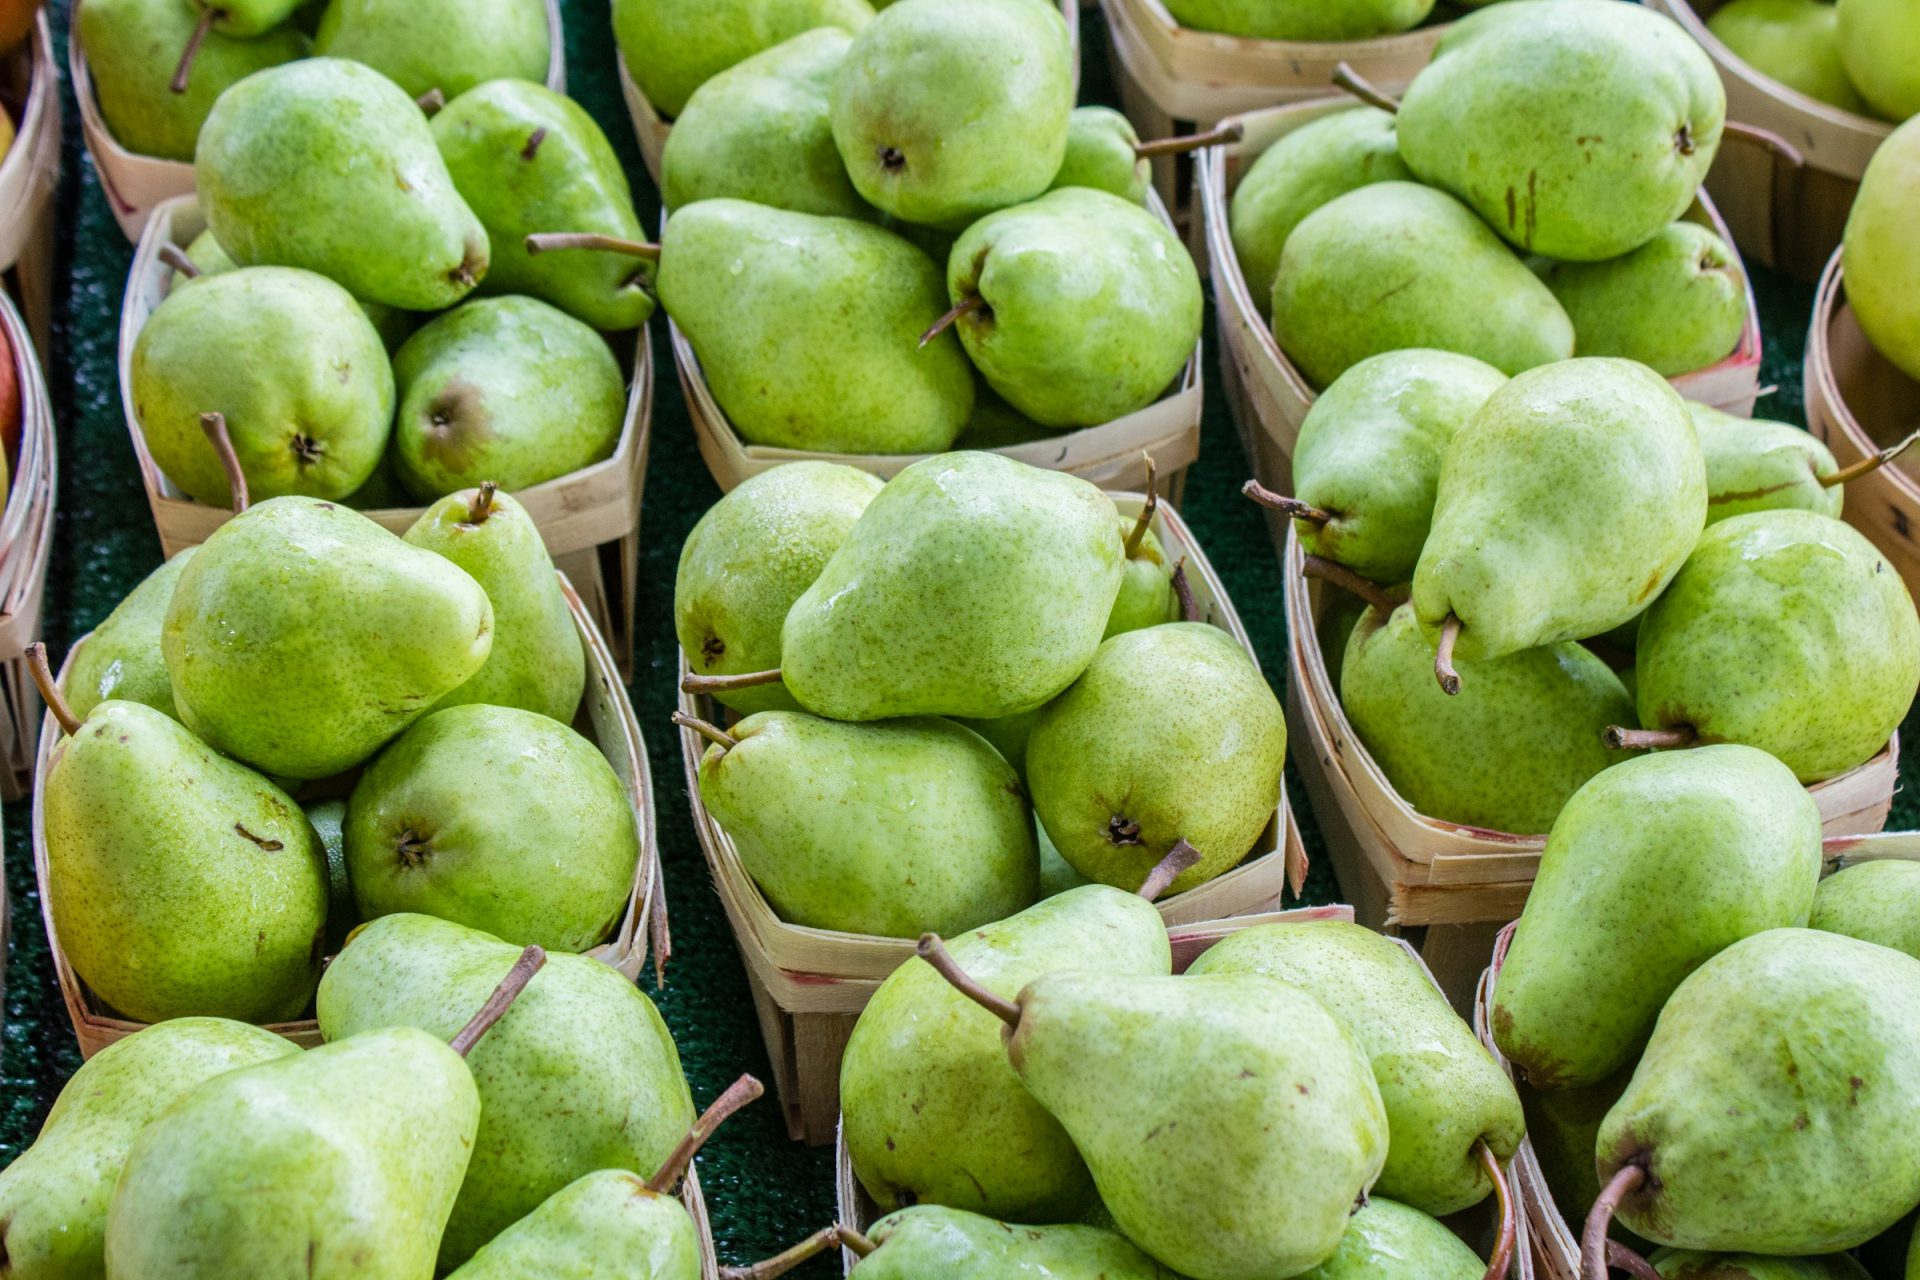 Pears: They ripen from the inside